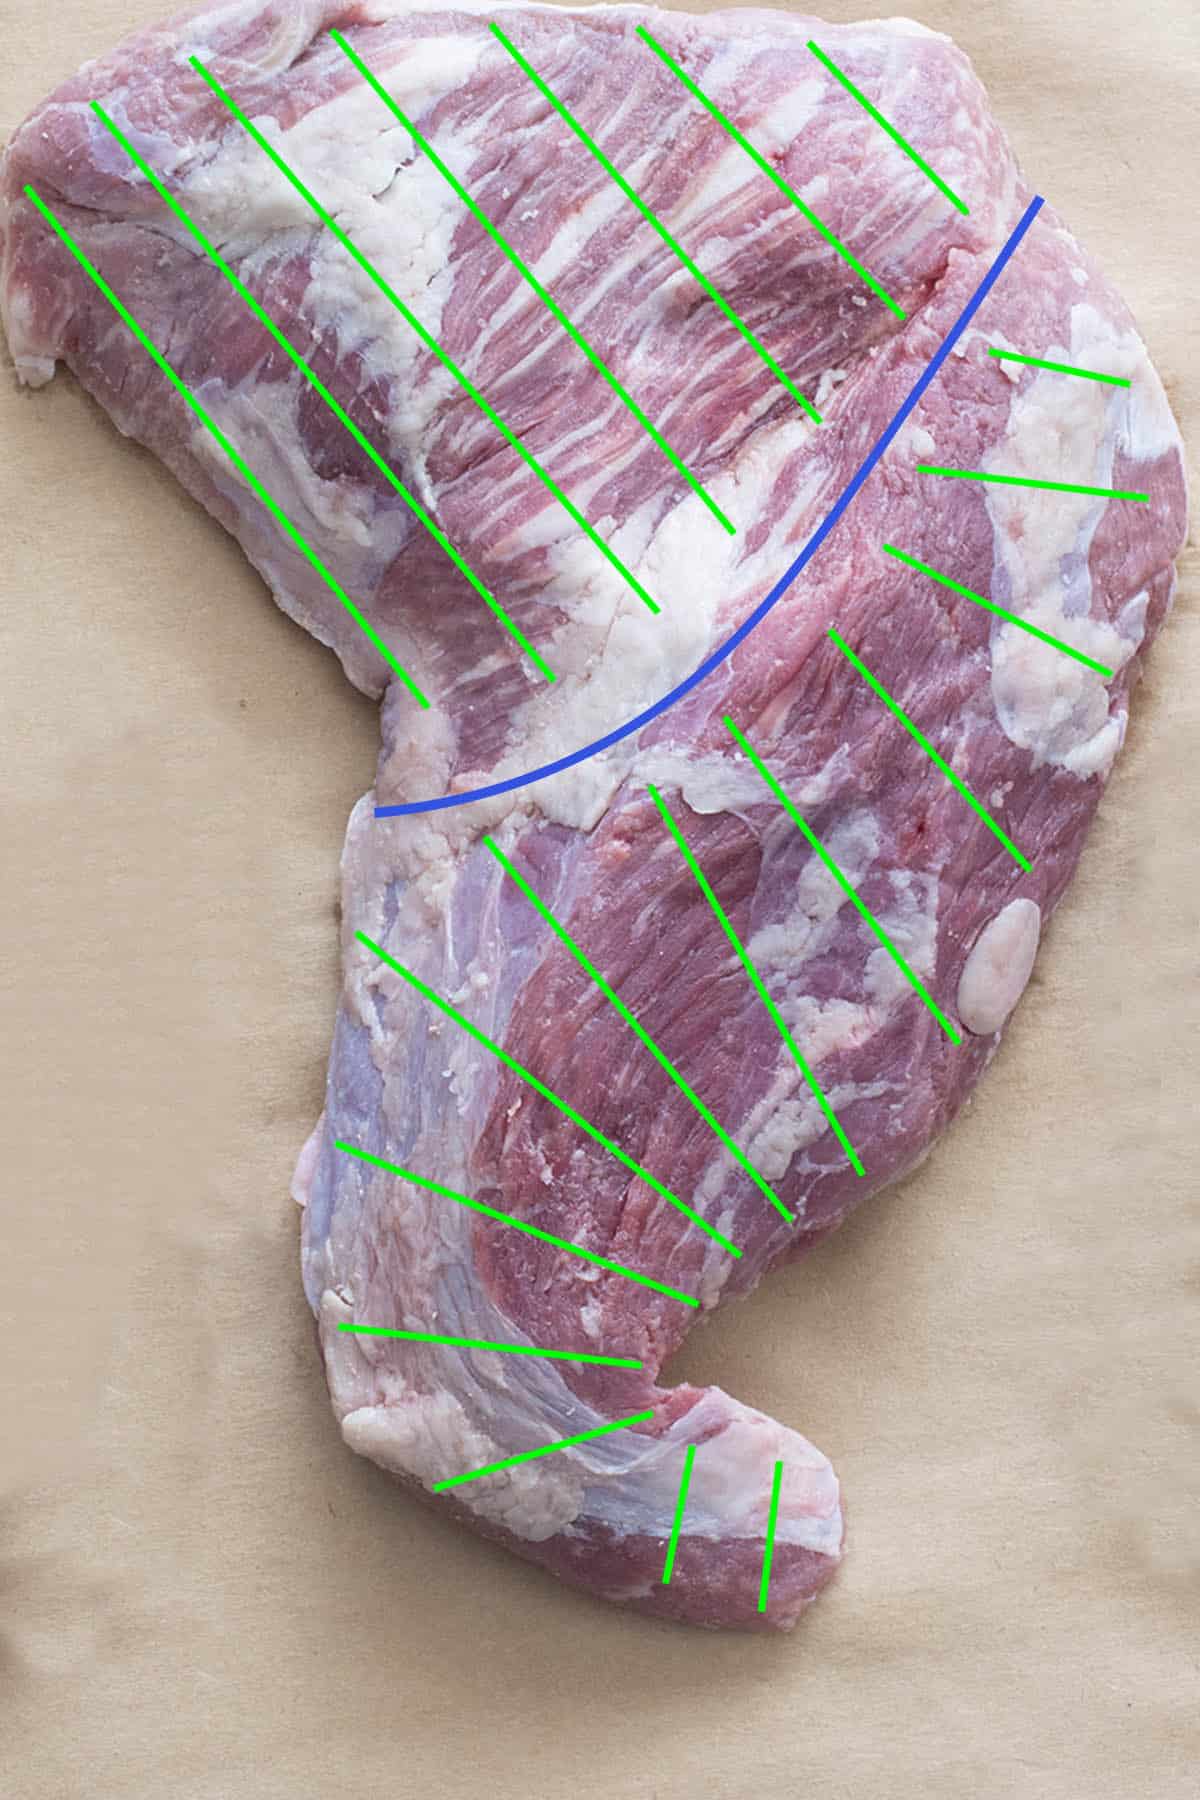 How to Cut Tri-Tip